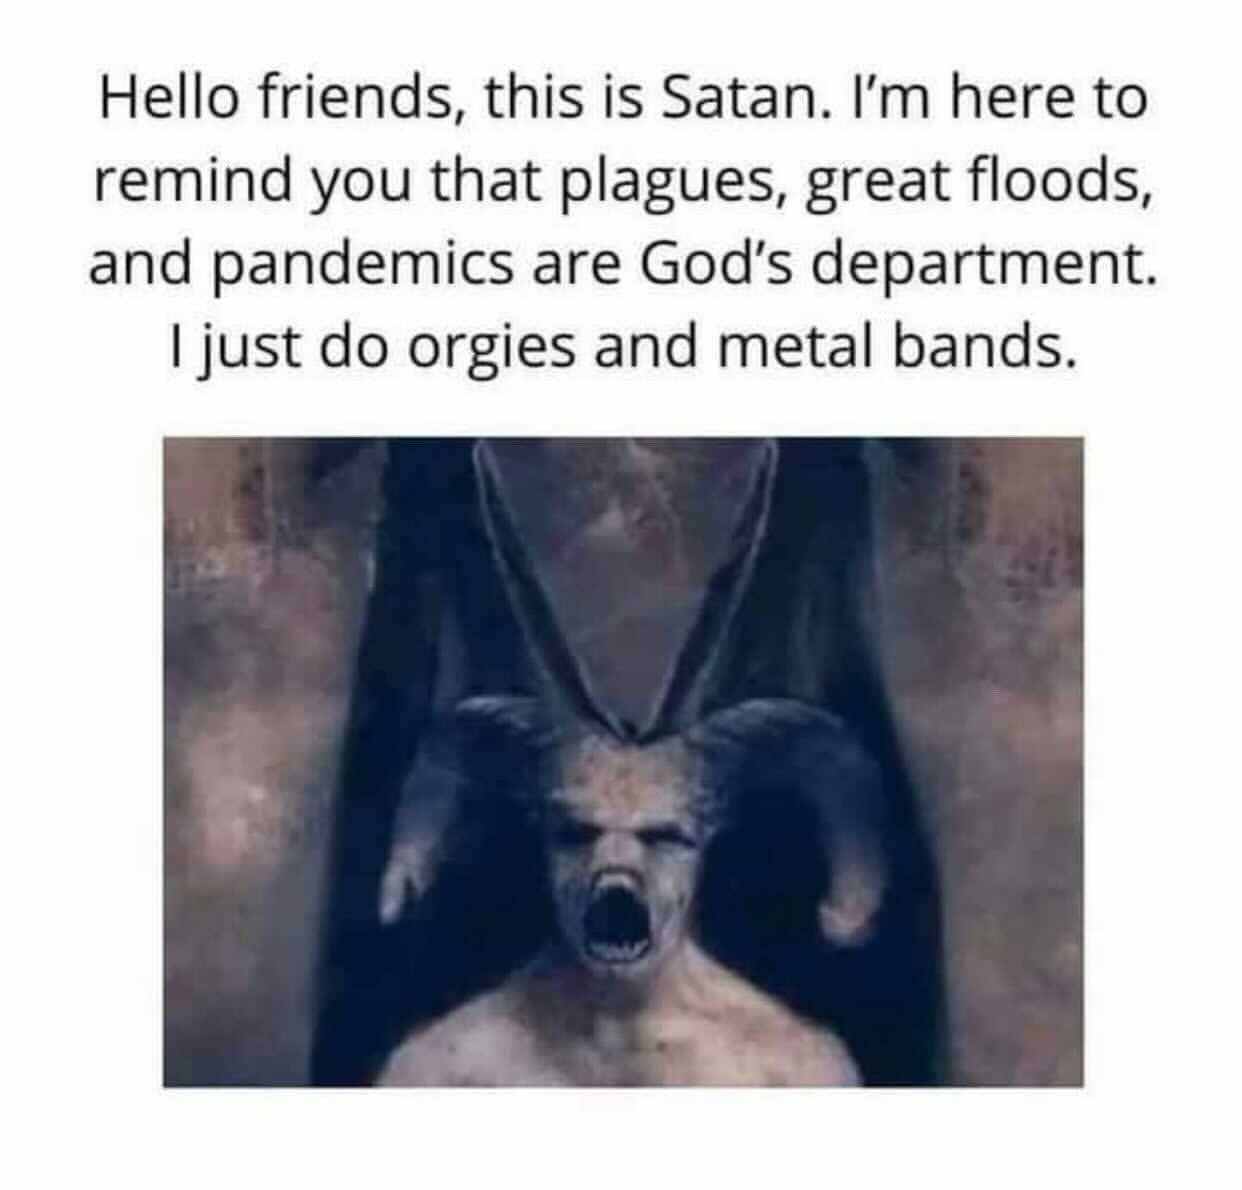 "Hello friends, this is Satan. I'm here to remind you that plagues, great floods and pandemics are God's department. I just do orgies and metal bands."